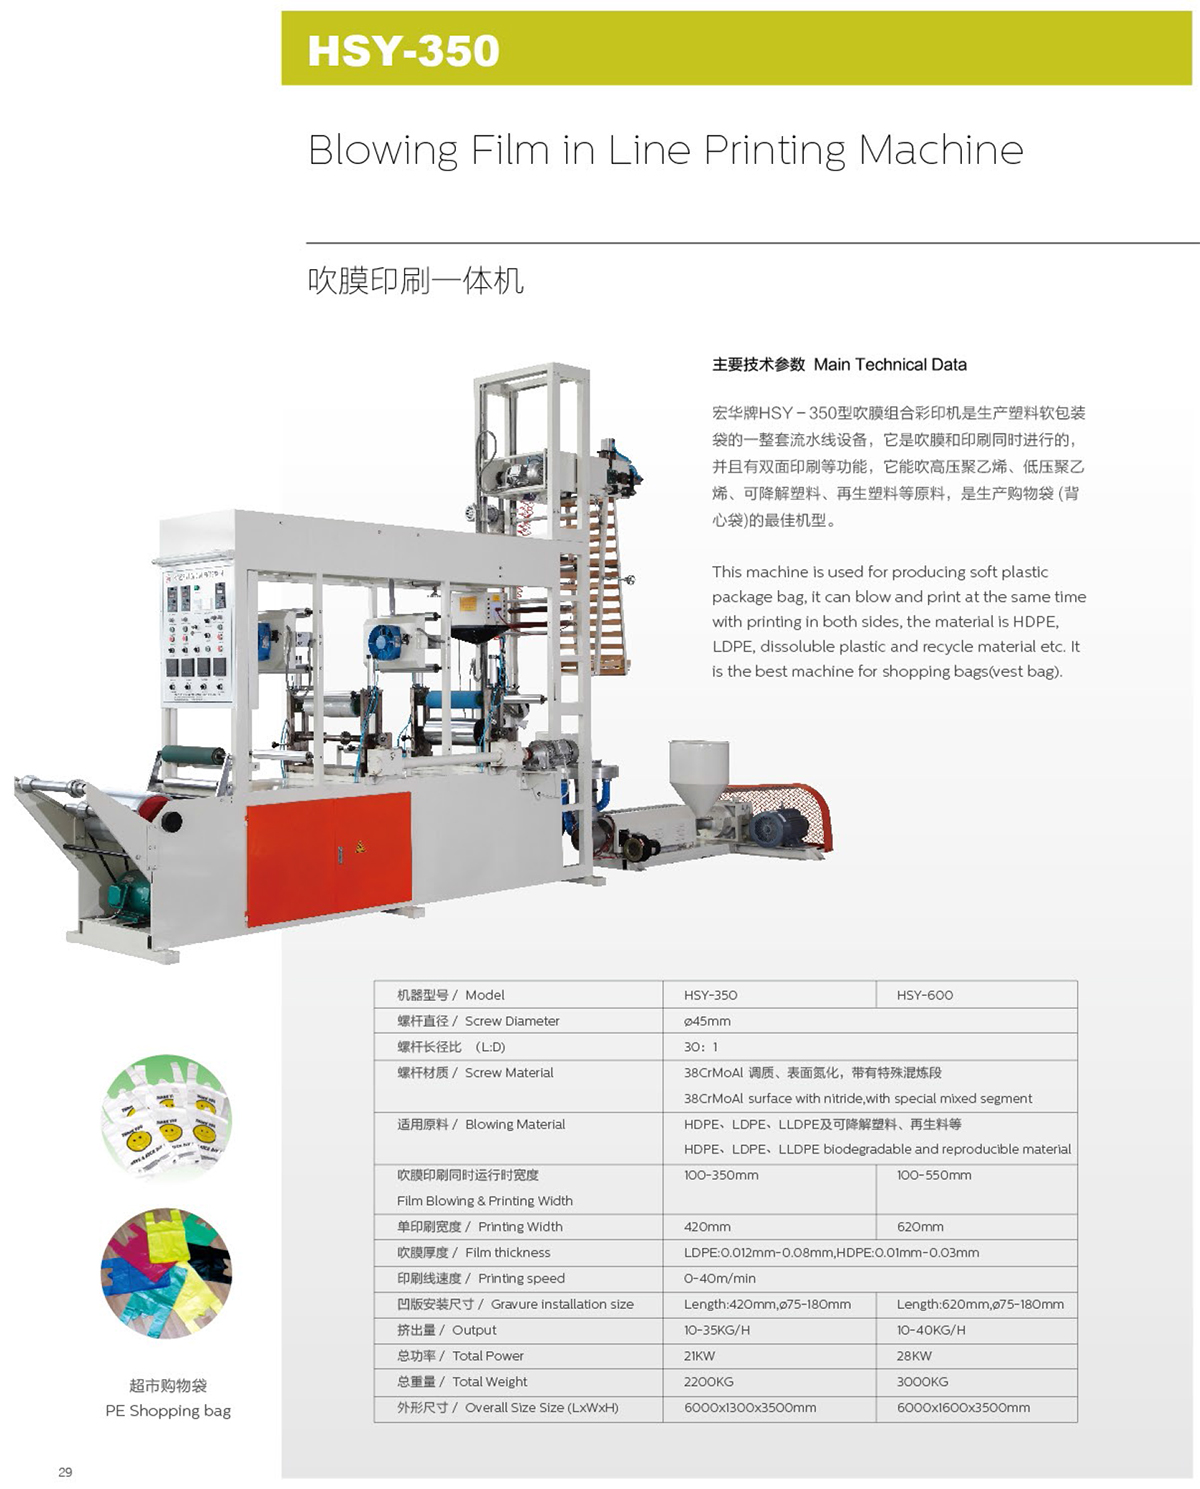 HSY-350 Film Blowing And Printing Machine